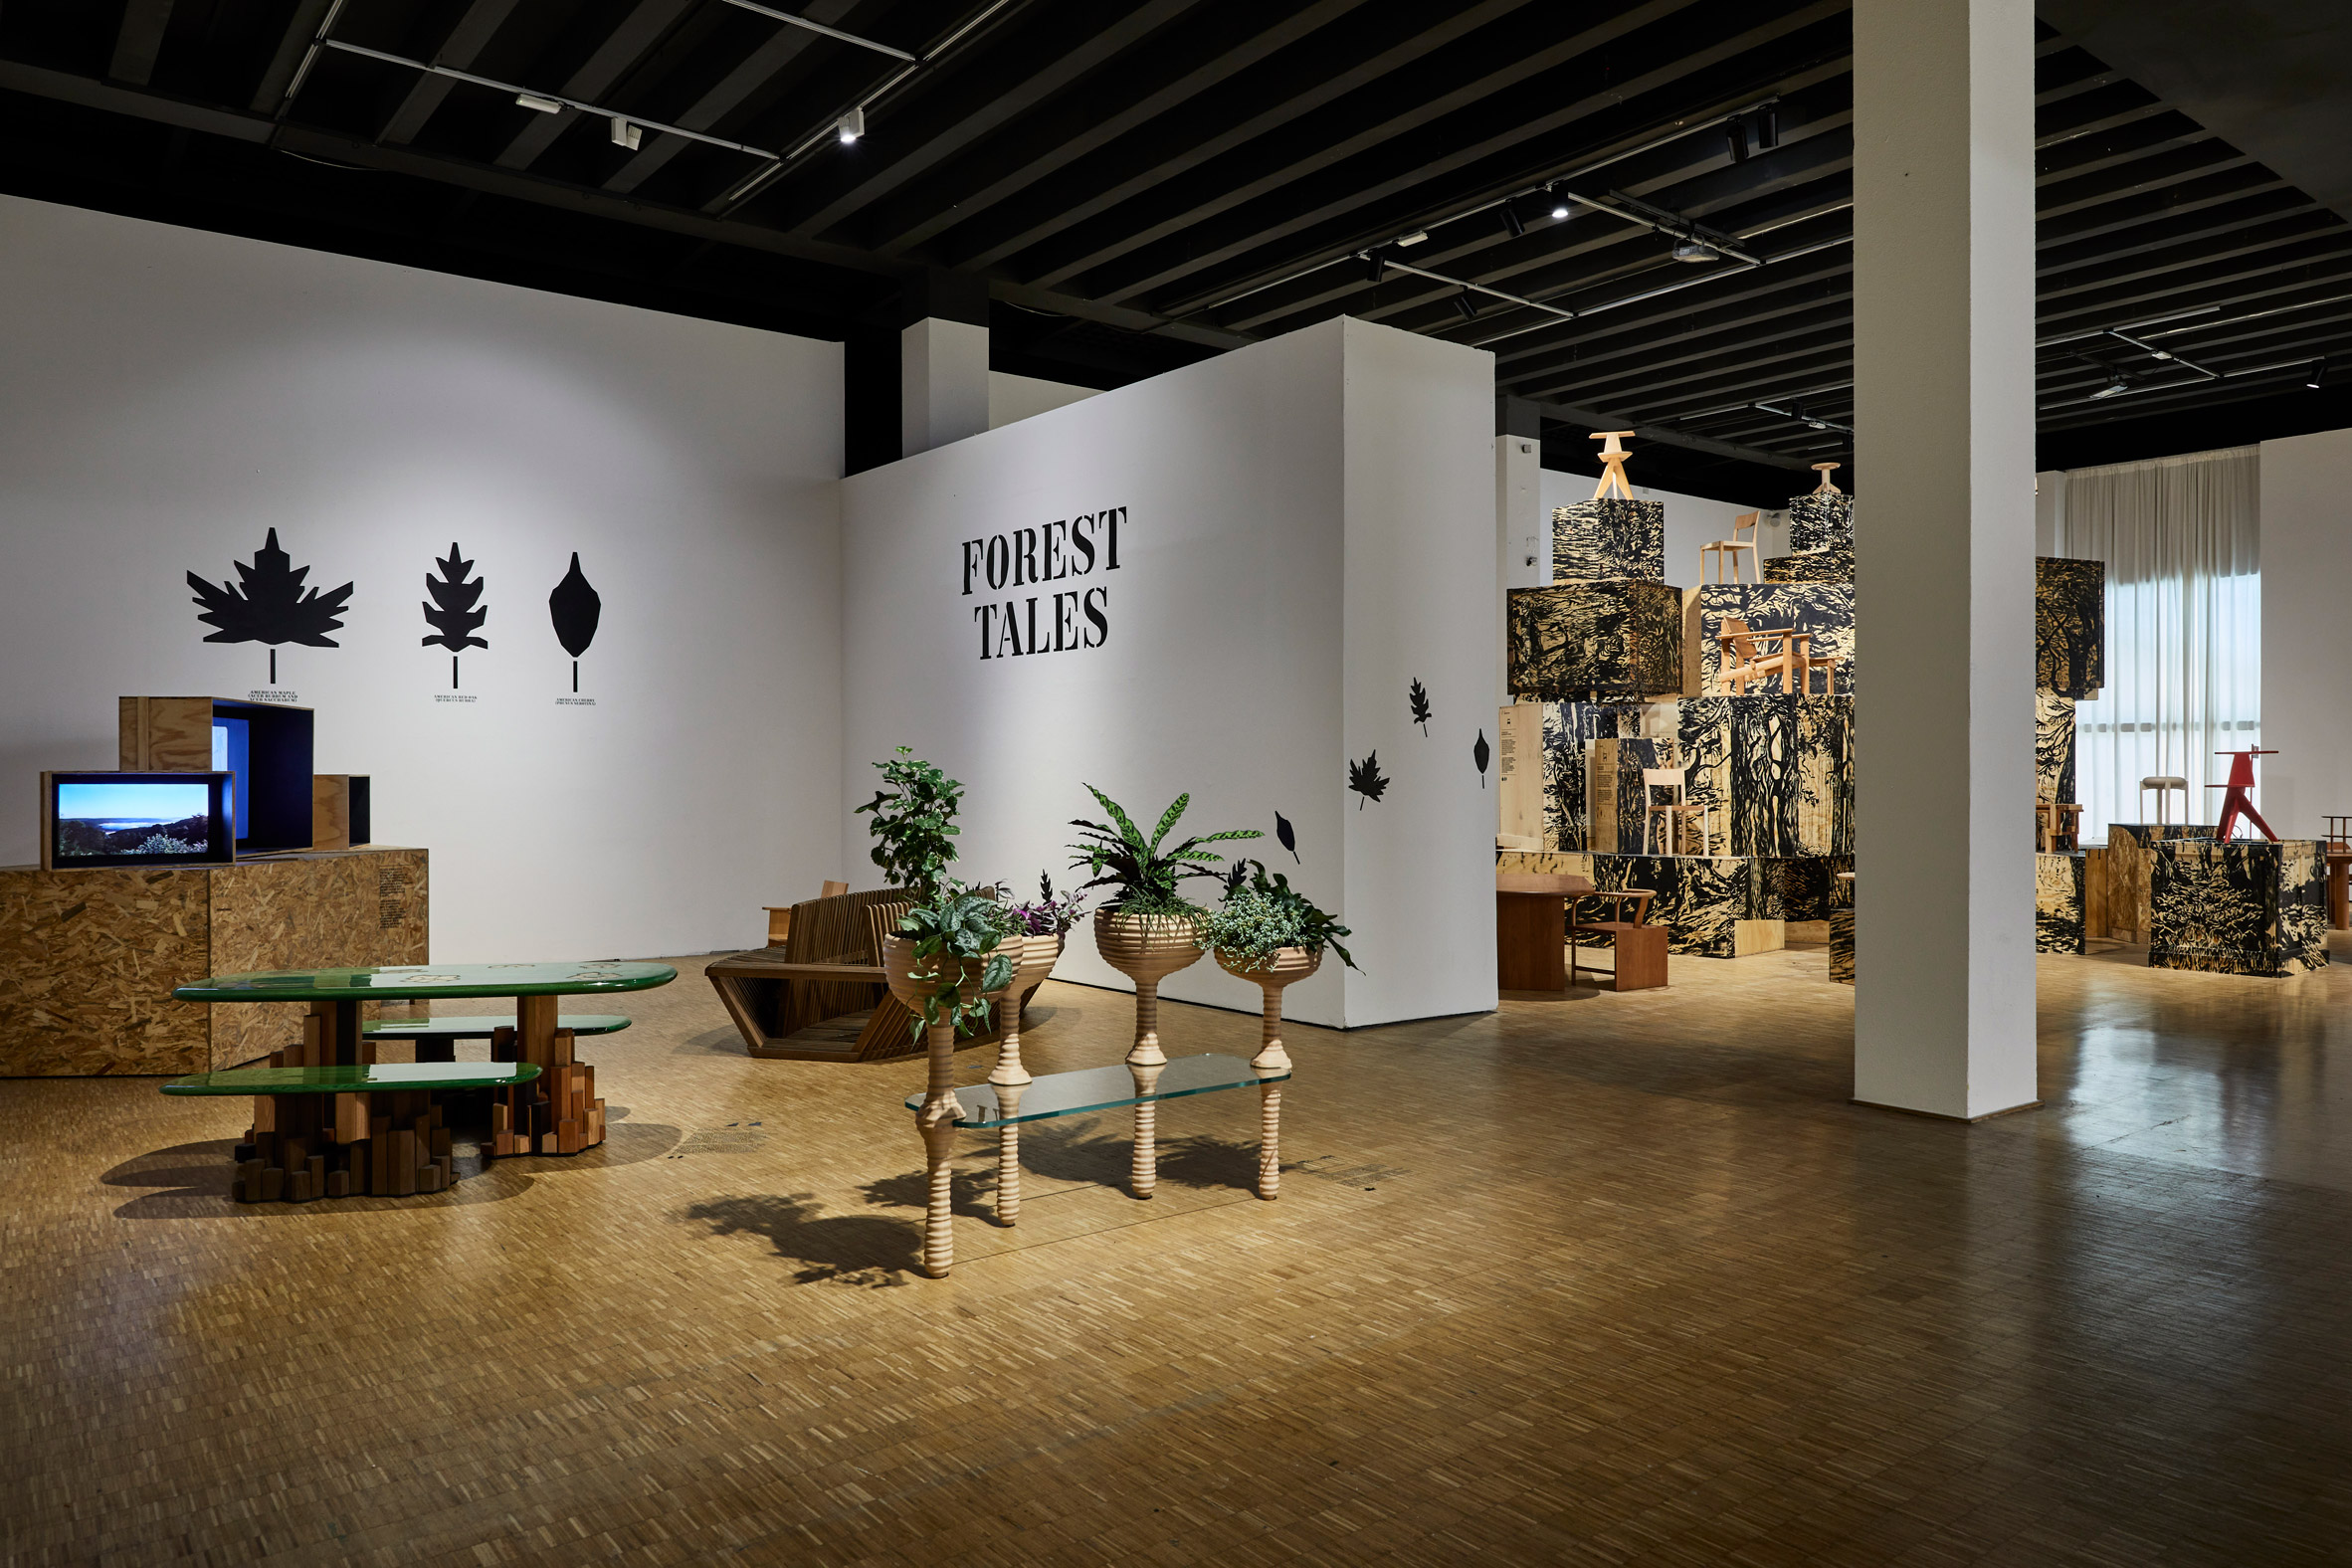 Forest Tales at Milan design week